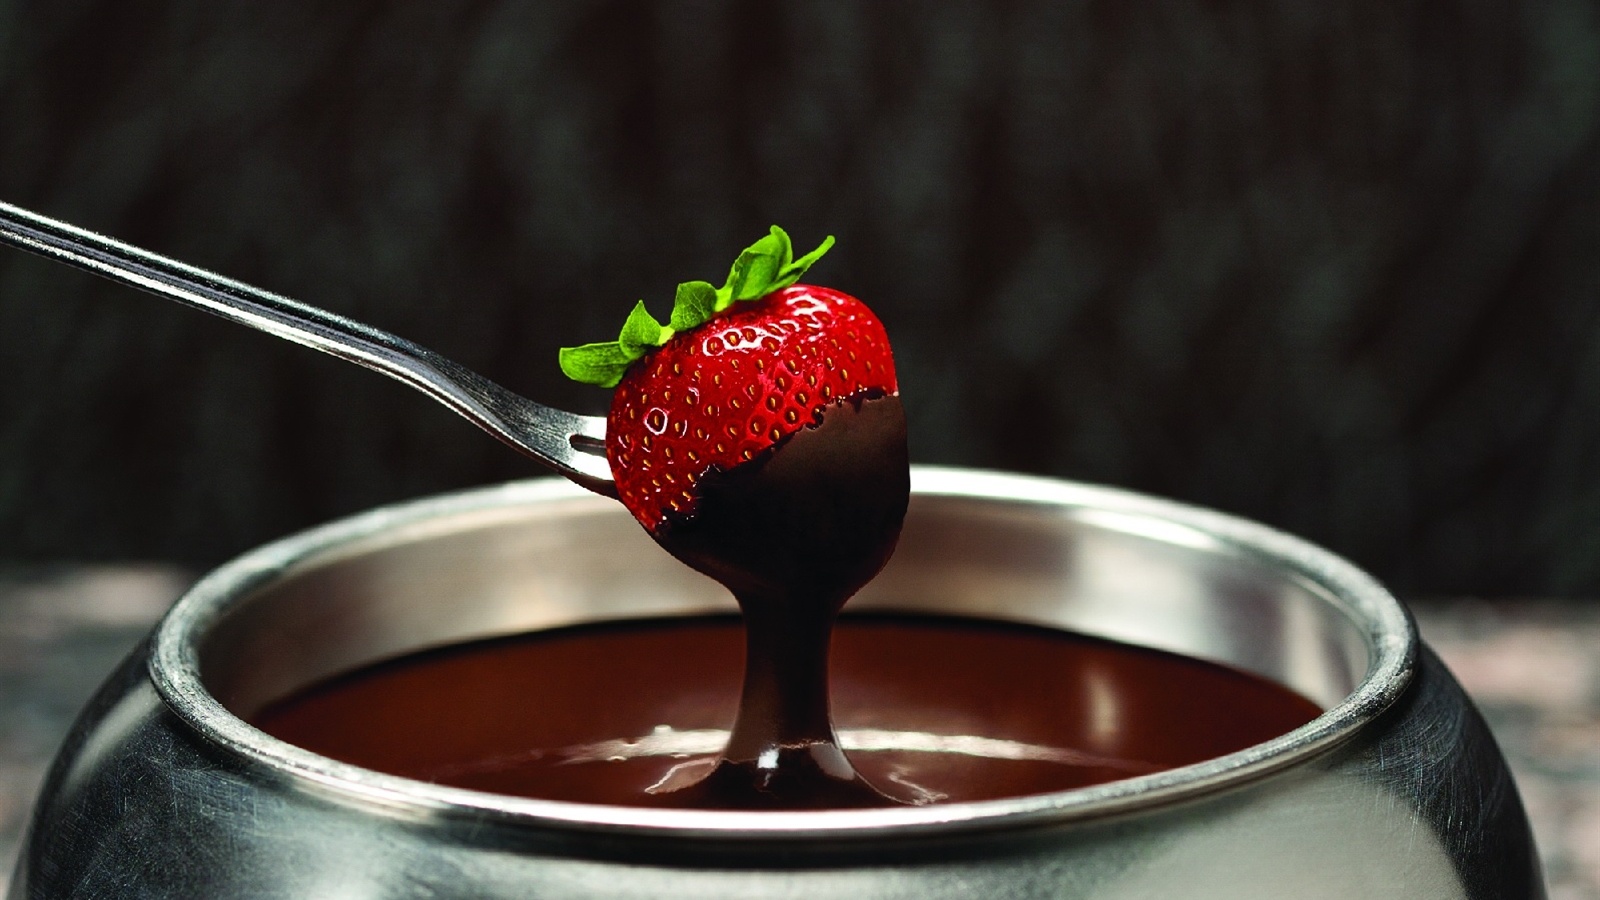 Strawberry and Chocolate Fondue at the Melting Pot Greenville, SC